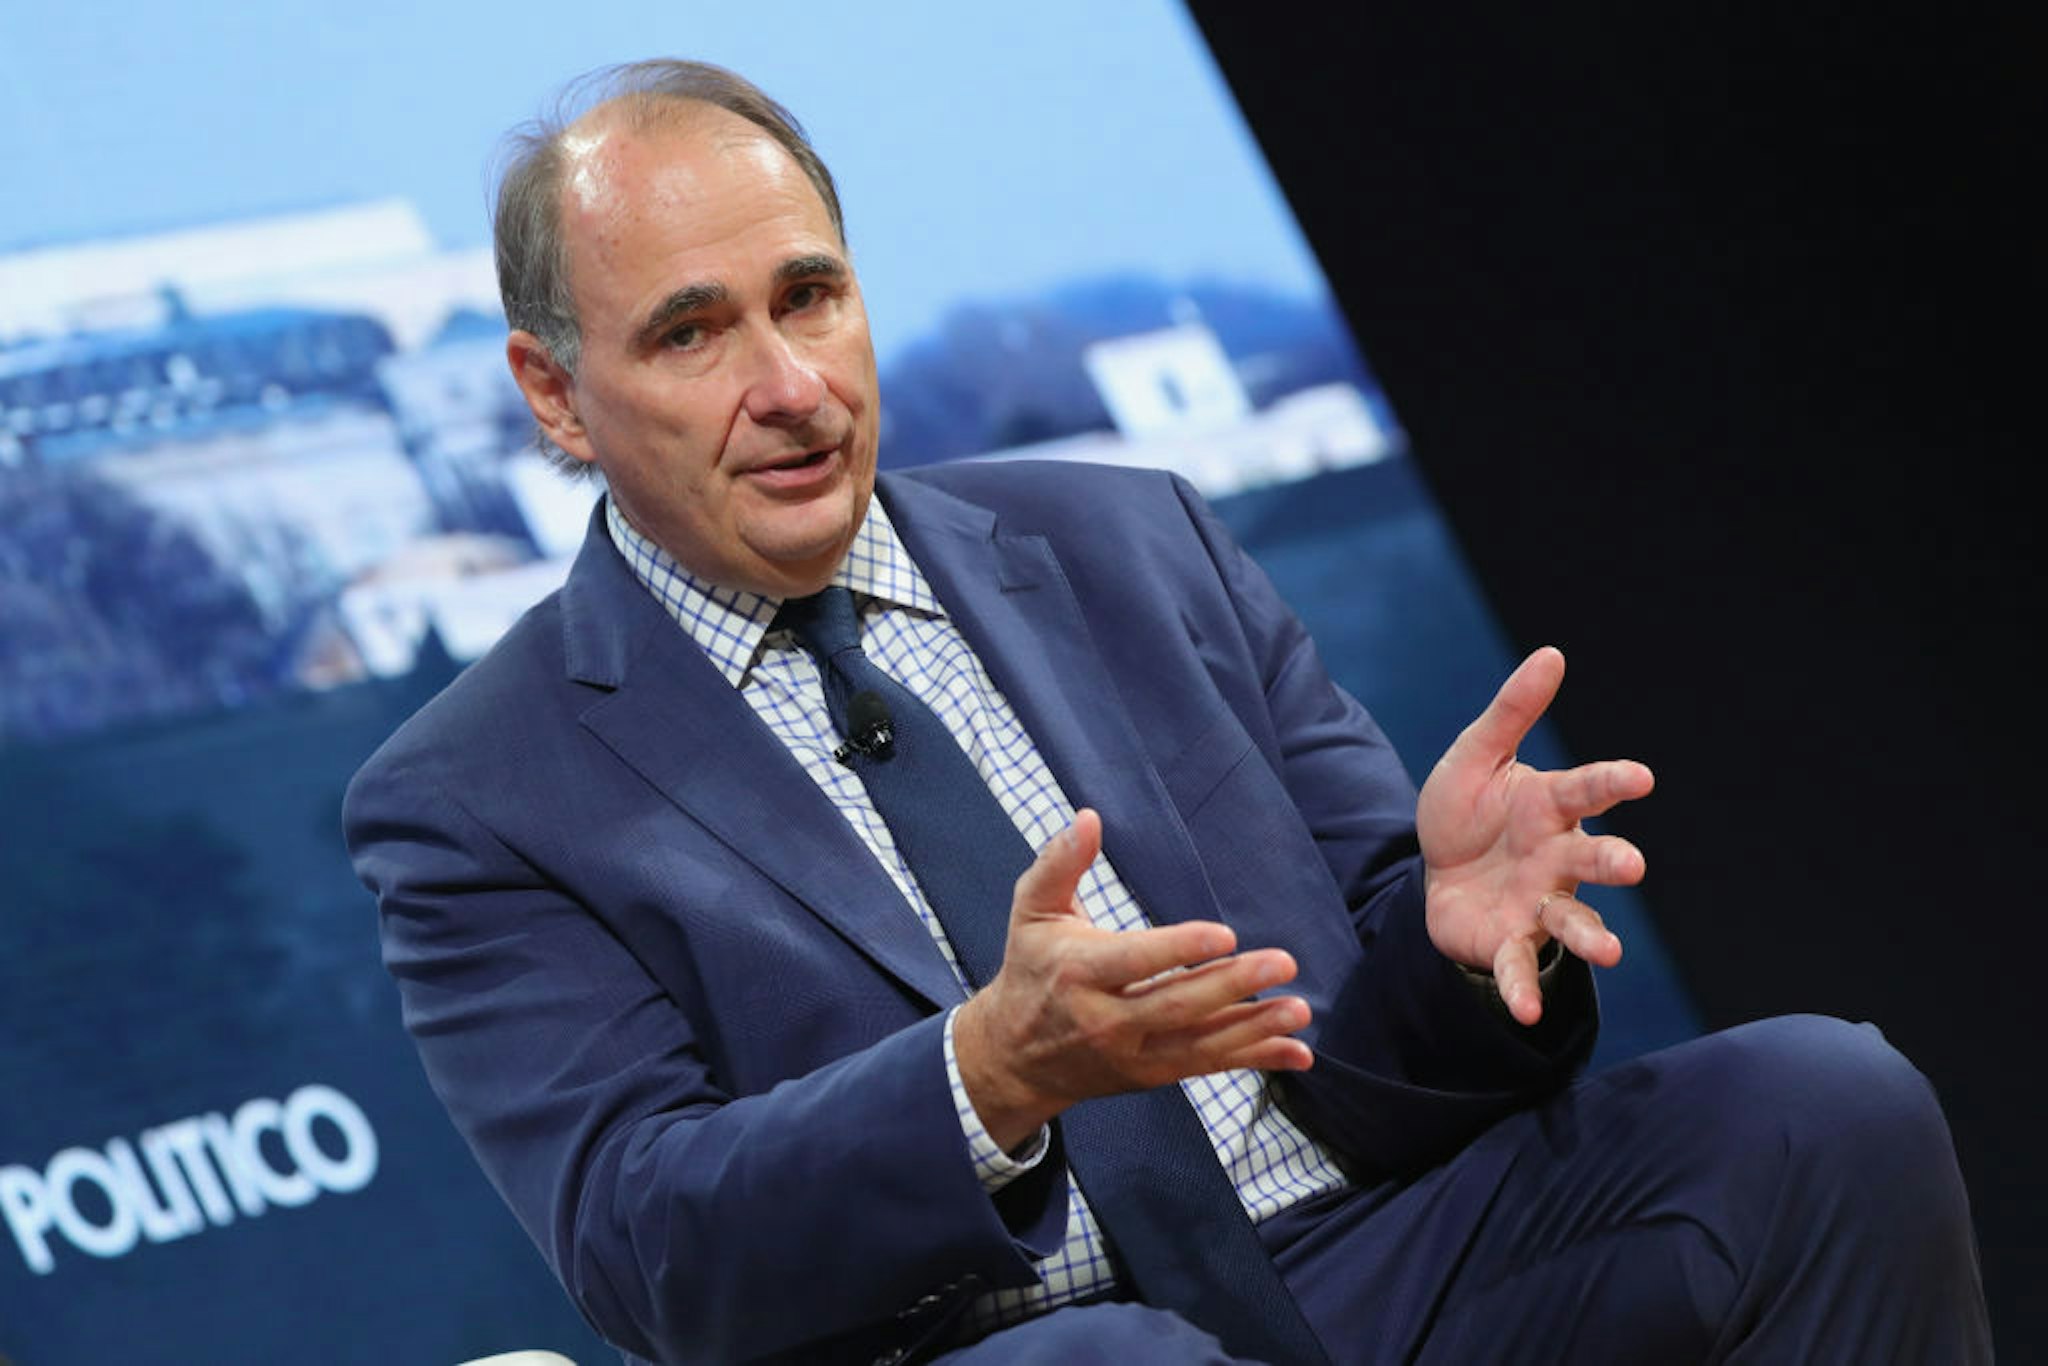 NEW YORK, NY - SEPTEMBER 18: David Axelrod, Director, Institute of Politics, The University of Chicago, speaks at The 2017 Concordia Annual Summit at Grand Hyatt New York on September 18, 2017 in New York City. (Photo by Paul Morigi/Getty Images for Concordia Summit)